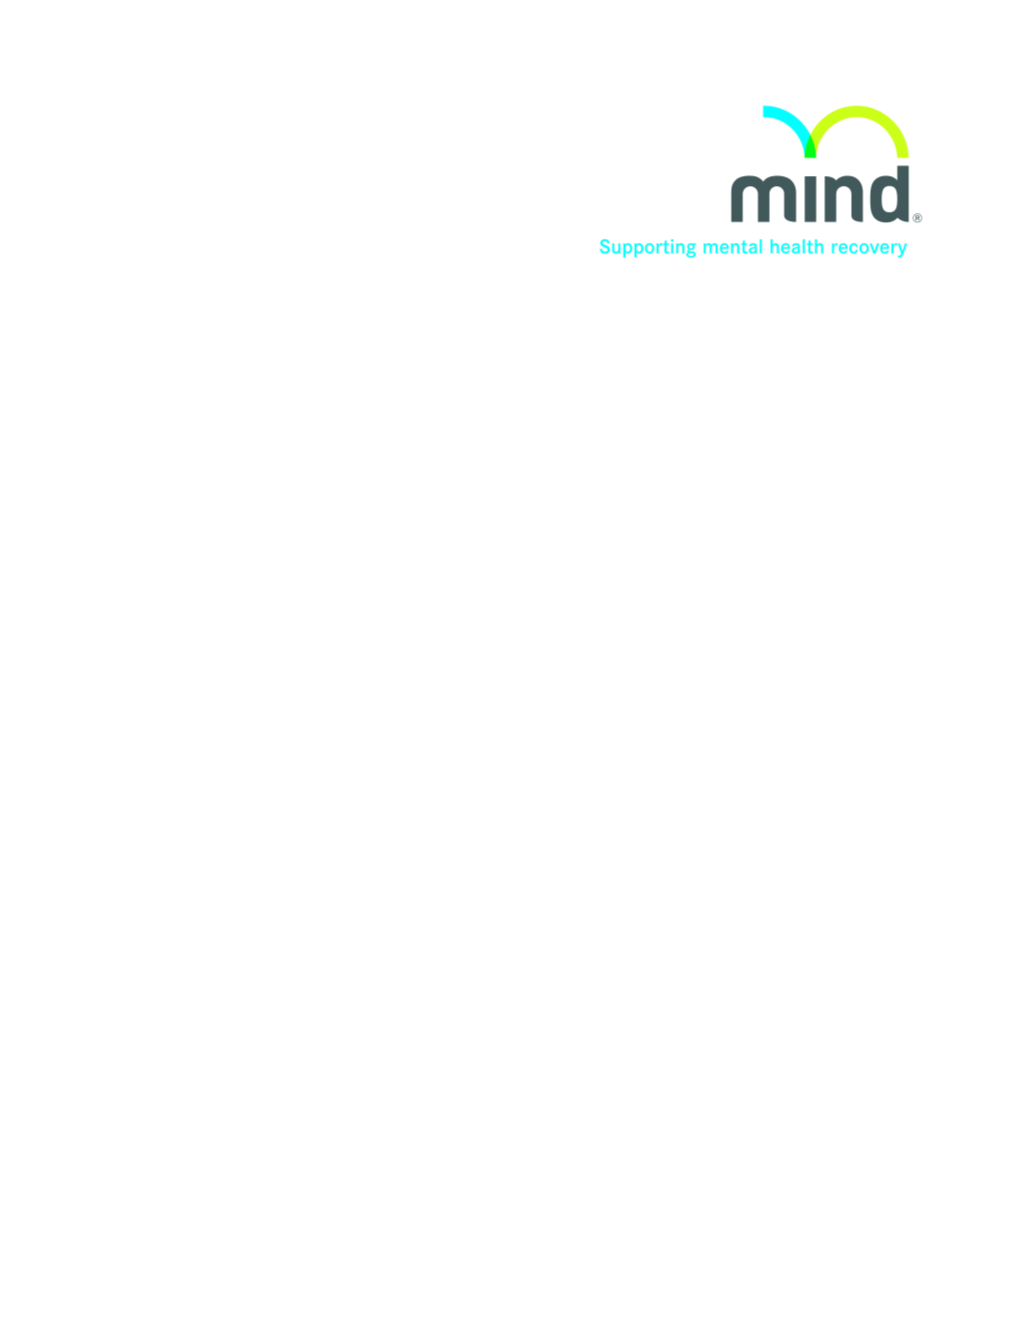 Mind Australia Is a Significant Provider of Support to Mental Health Carers and Families